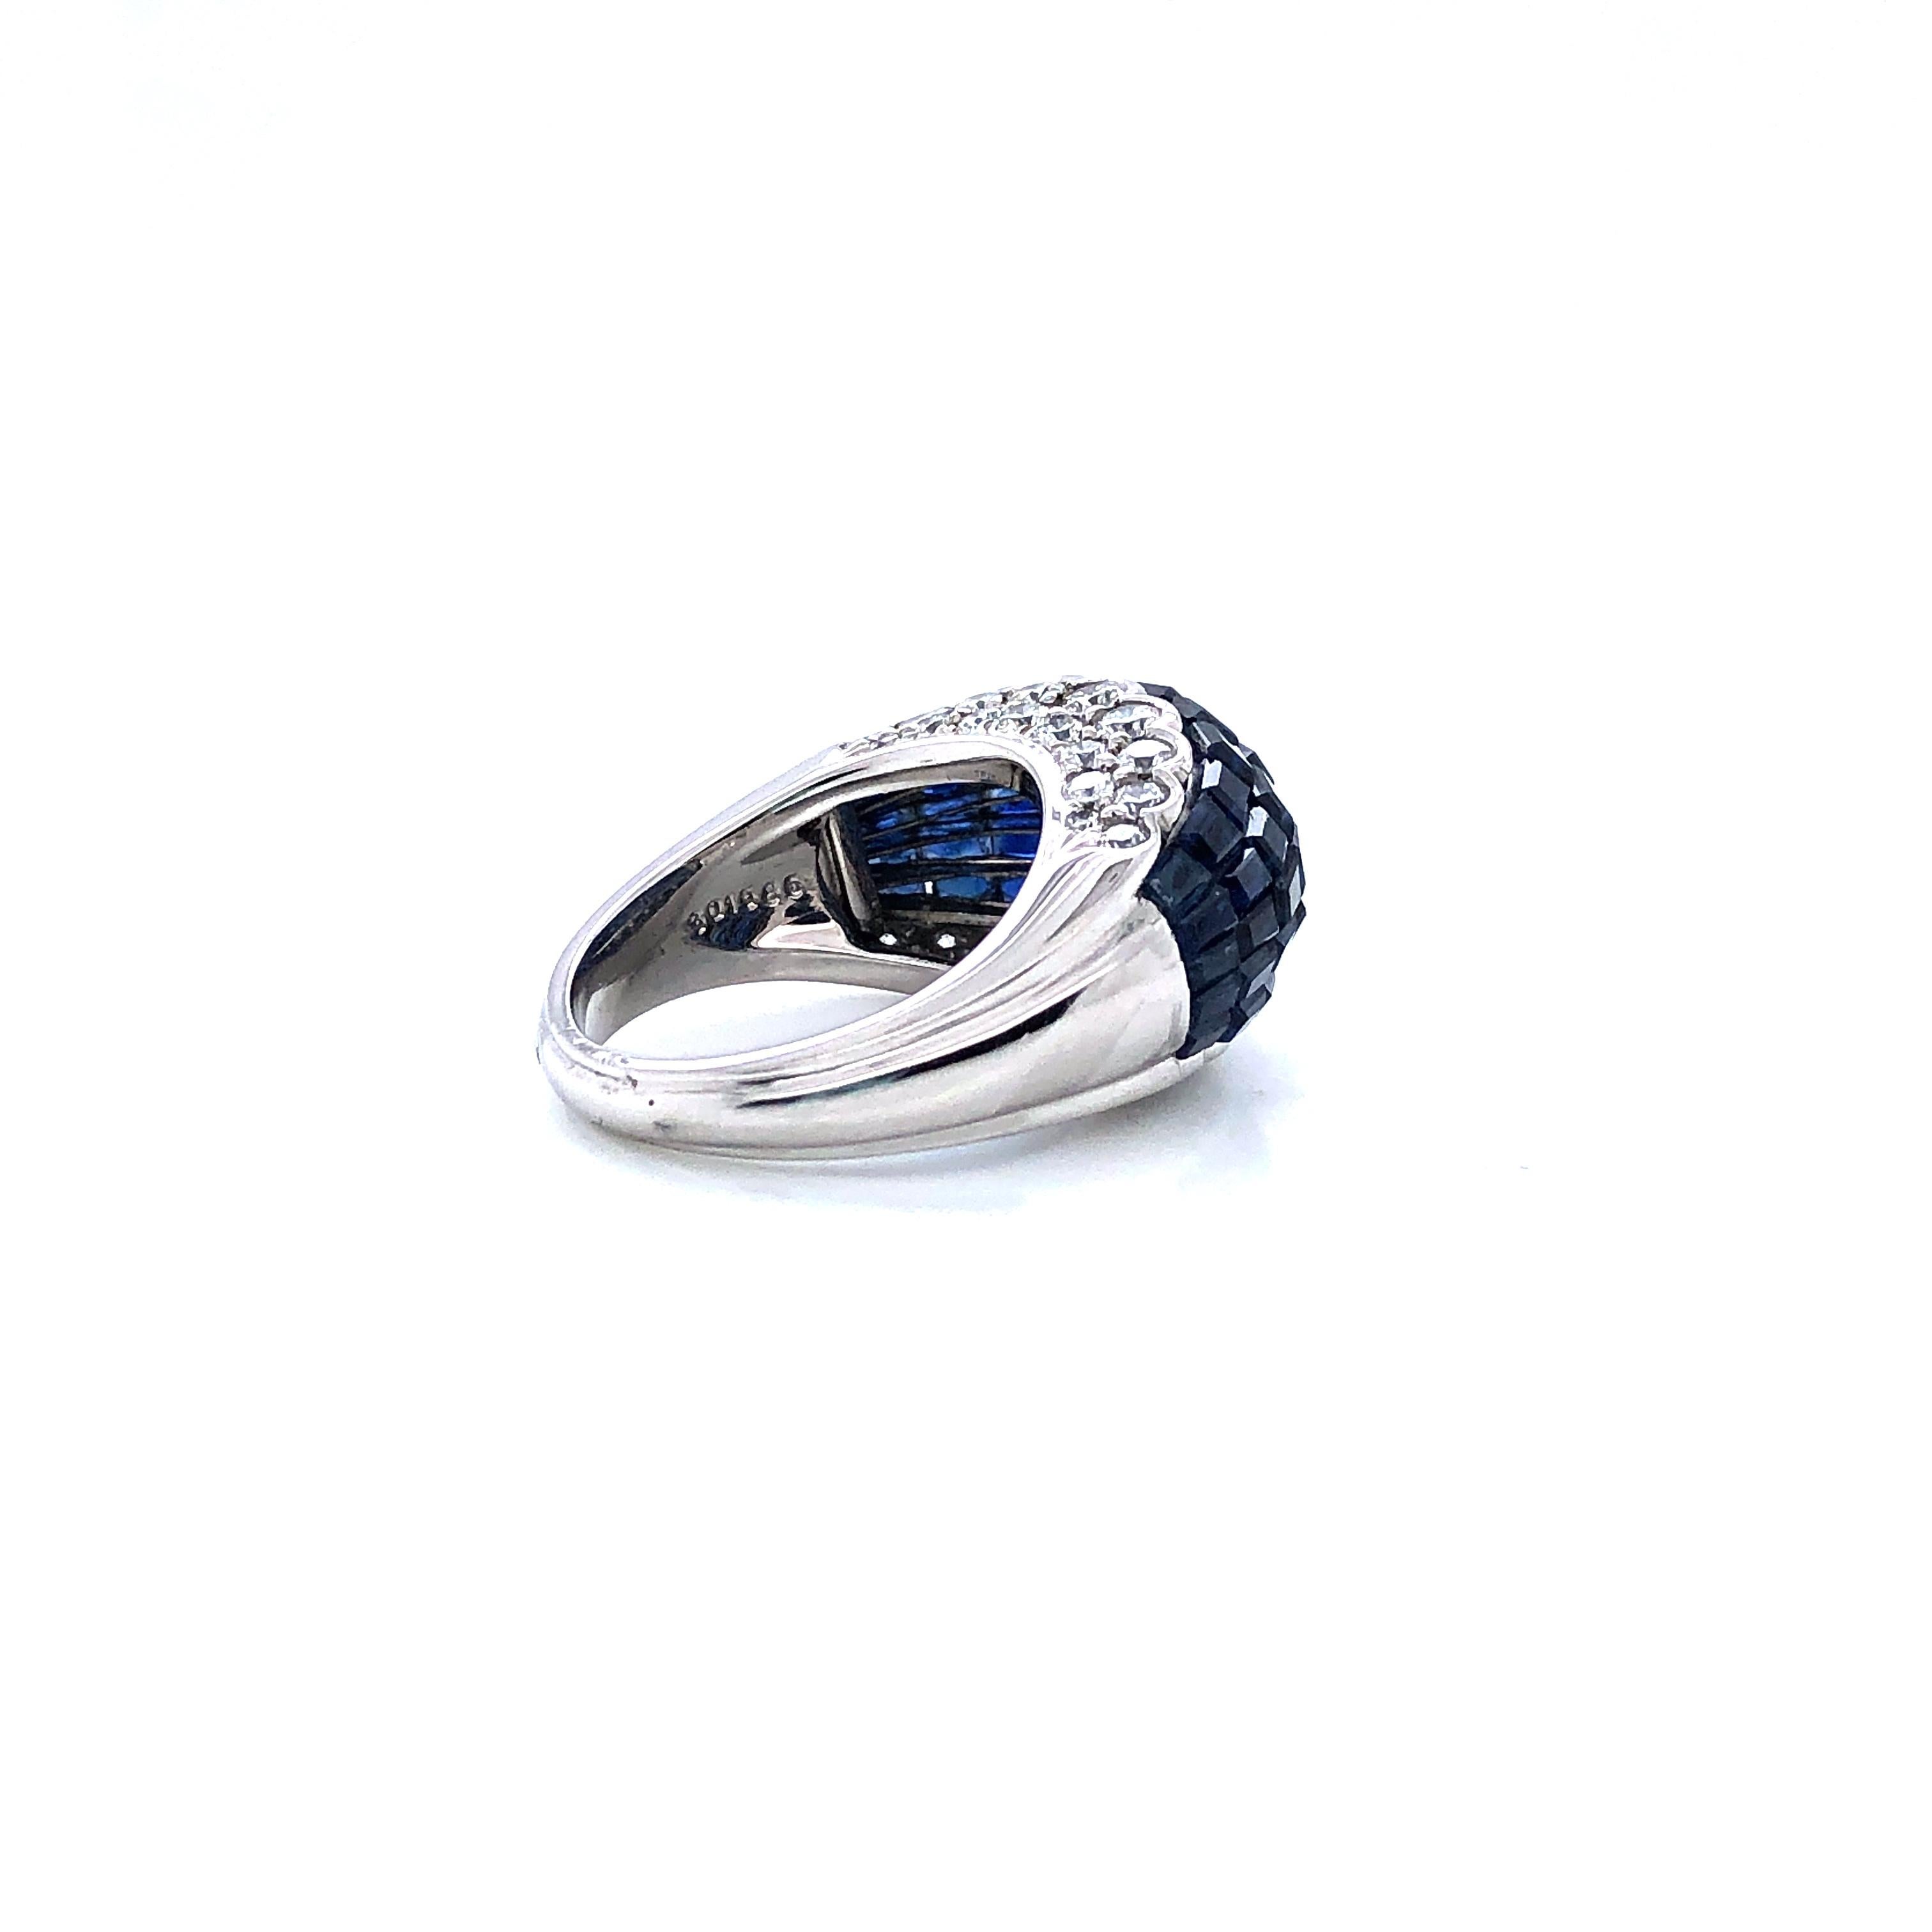 Contemporary Oscar Heyman Platinum Invisibly Set Sapphire Bombe Ring For Sale